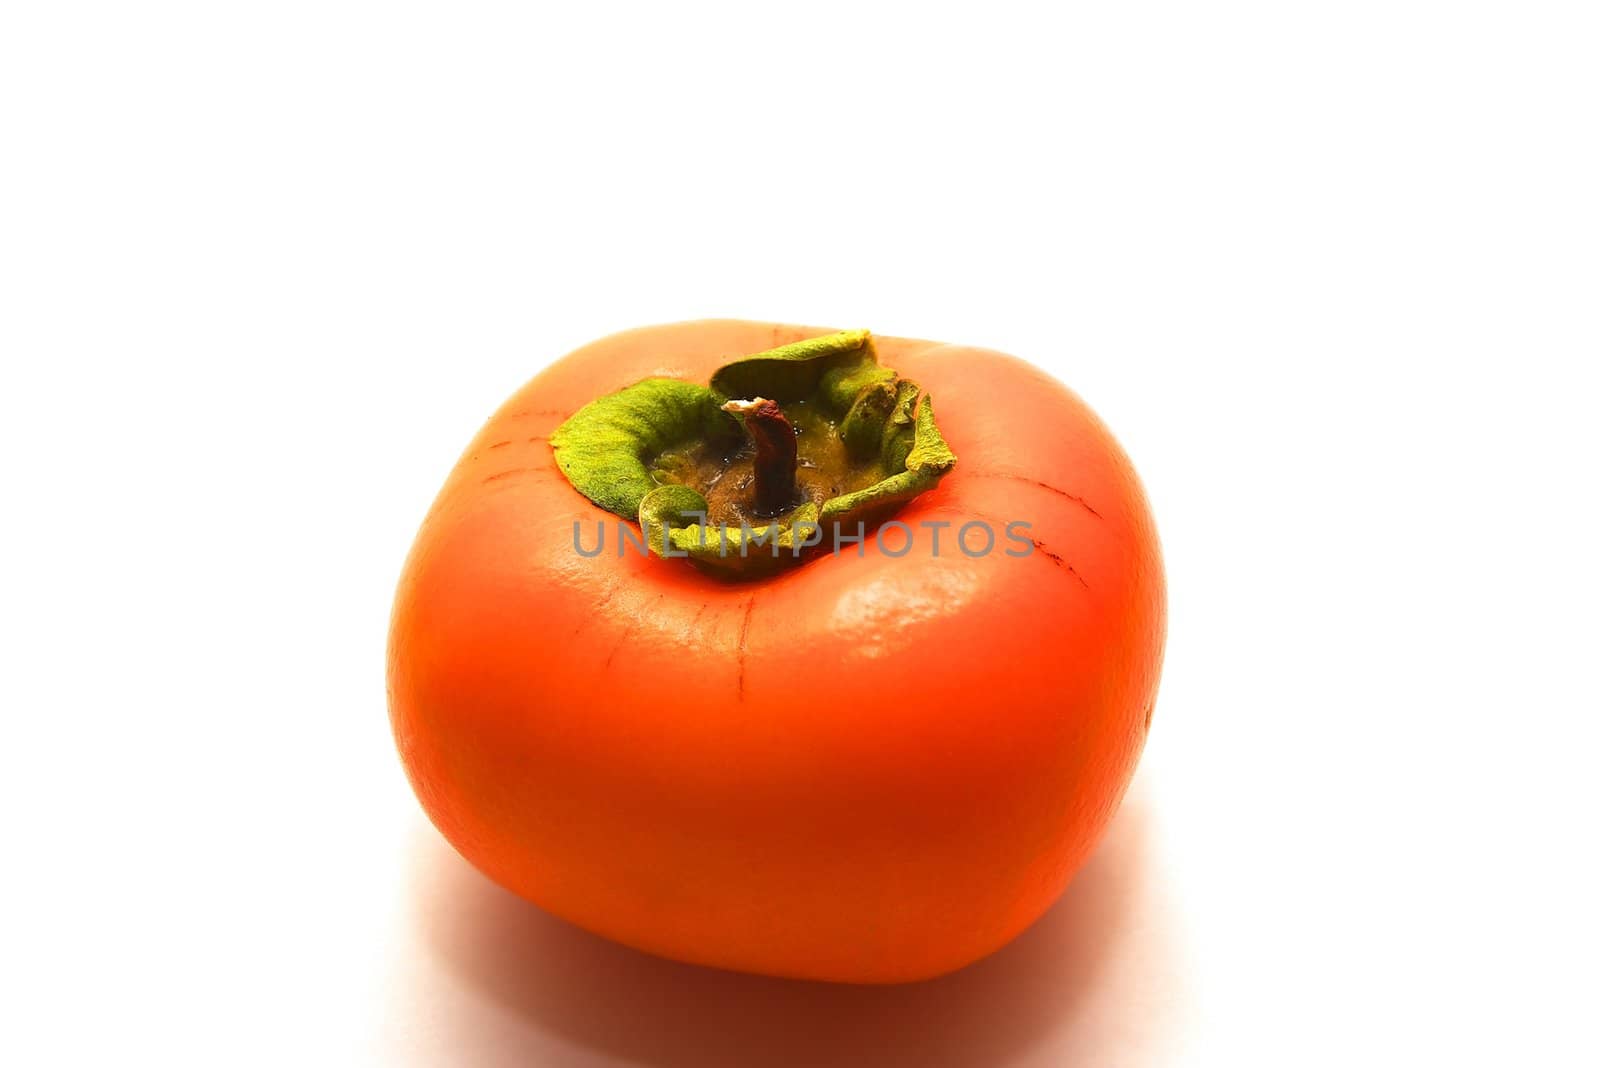 photo of the persimmon on white background